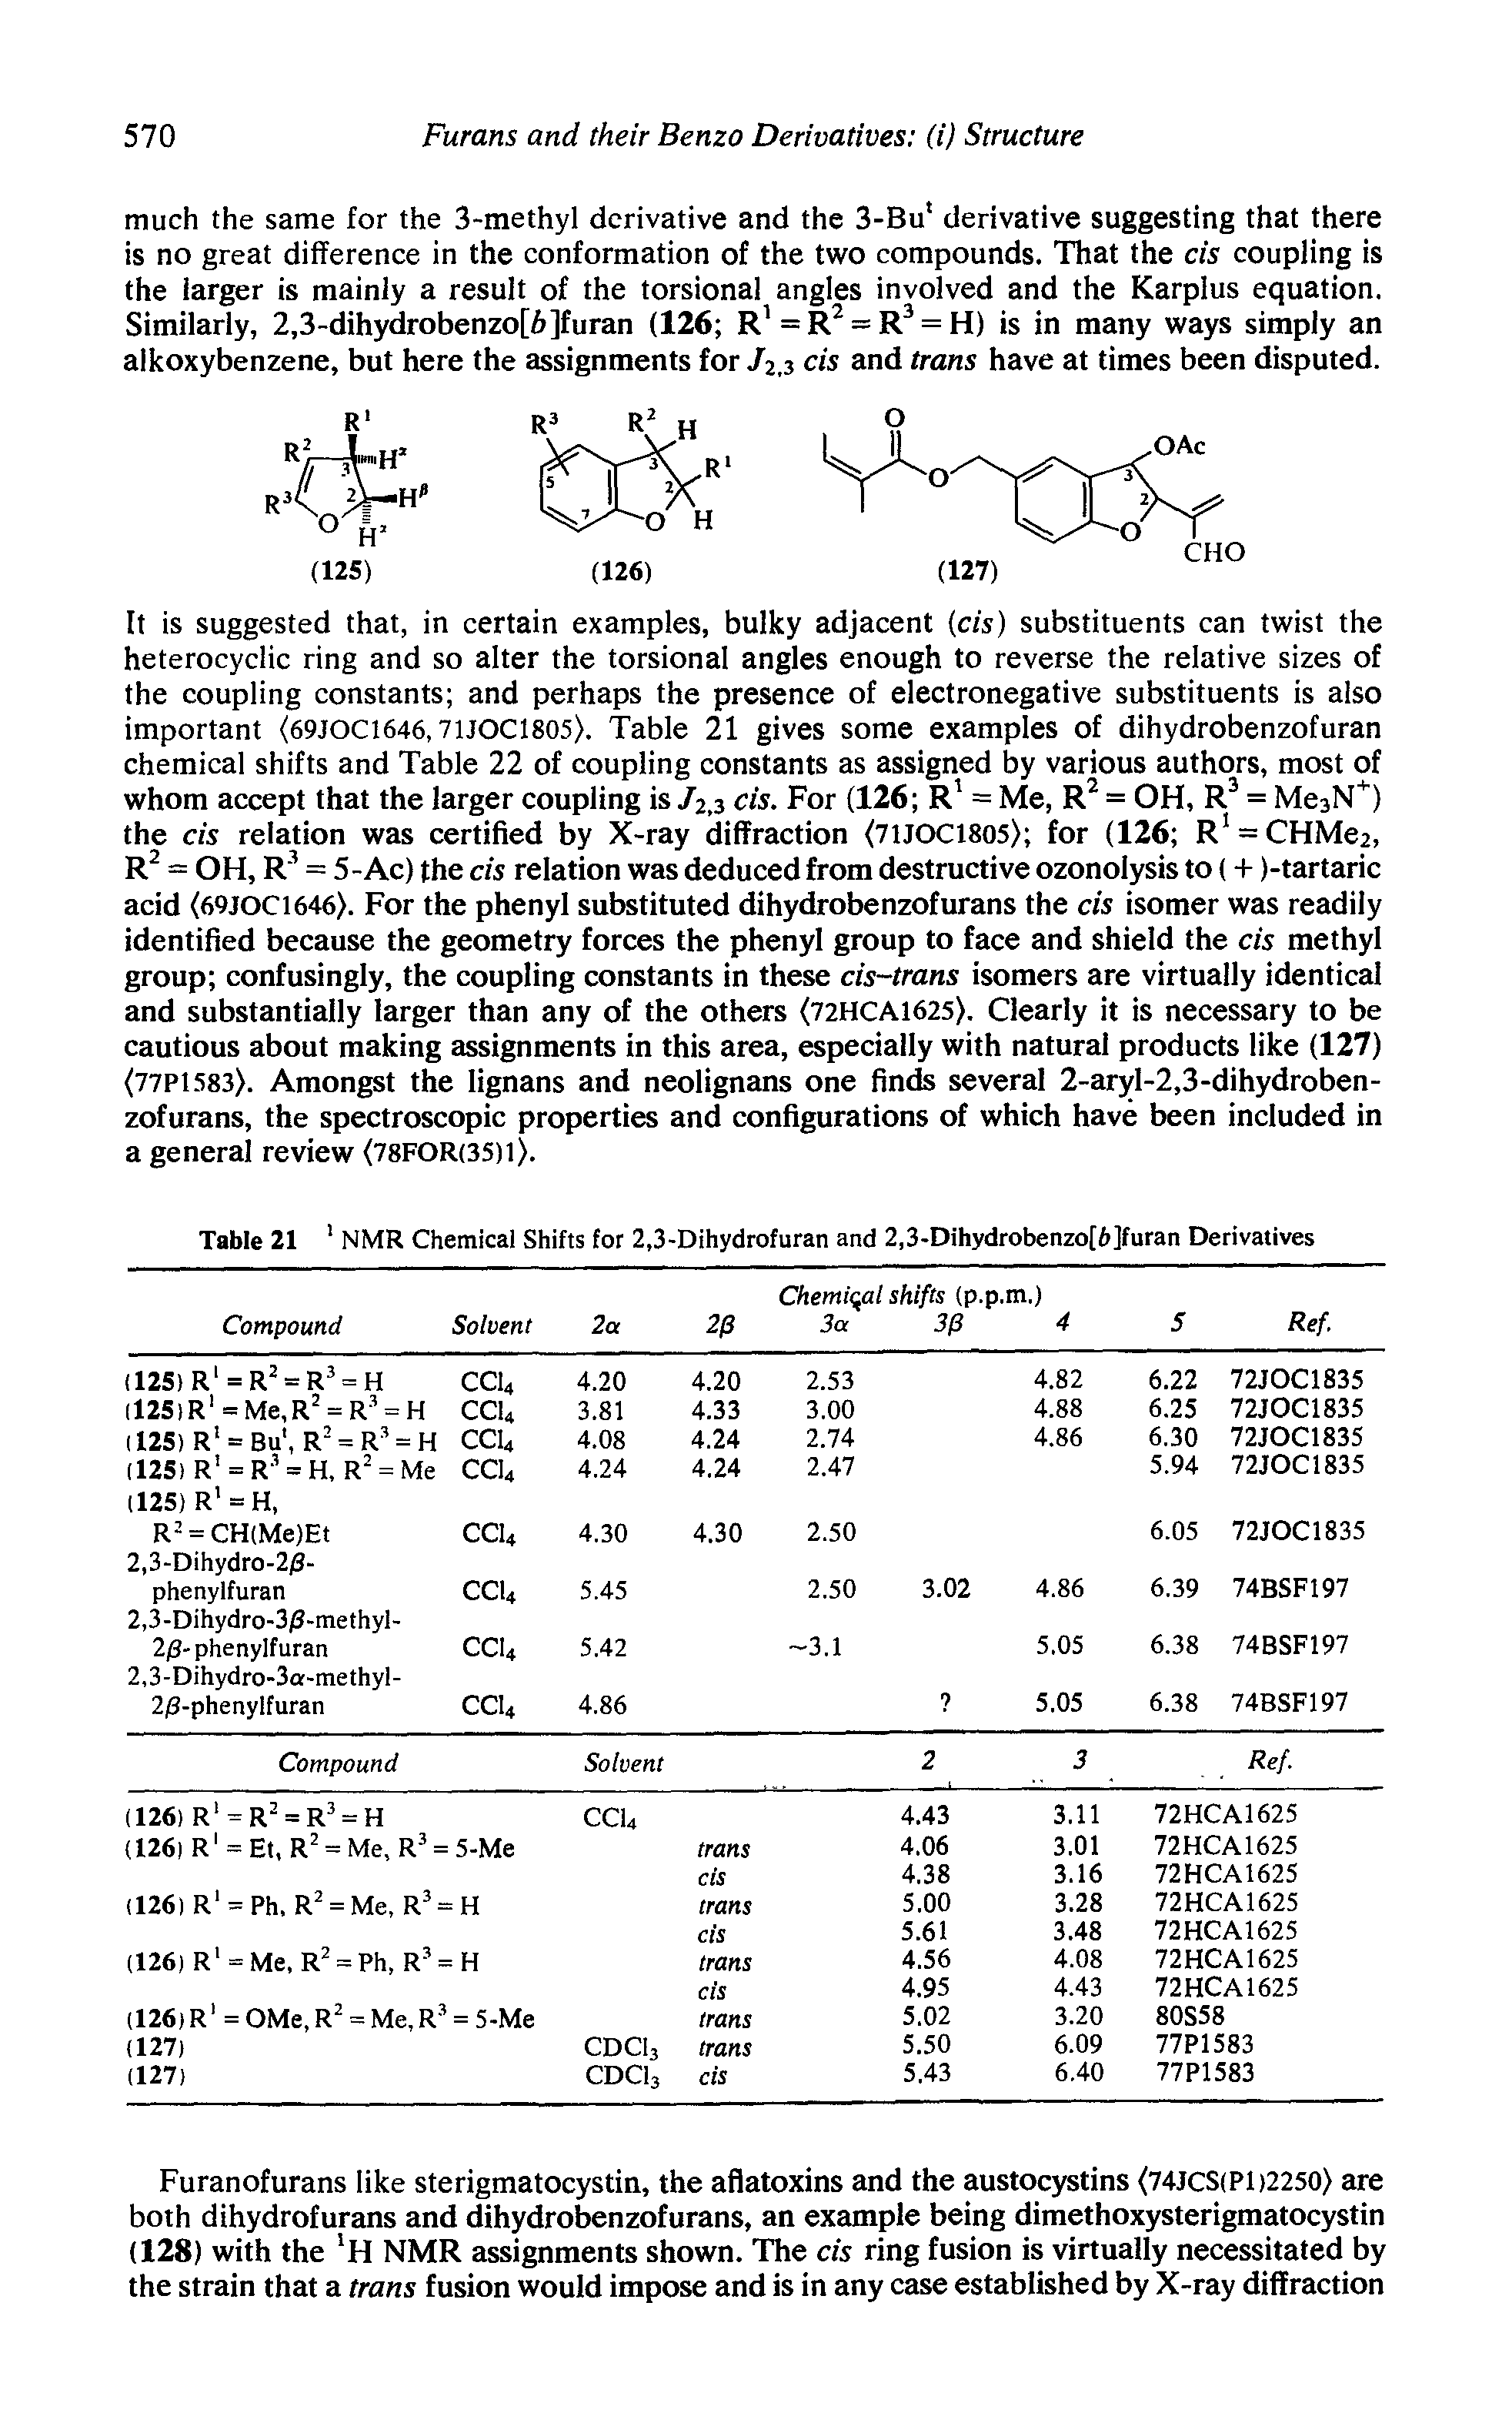 Table 21 1 NMR Chemical Shifts for 2,3-Dihydrofuran and 2,3-Dihydrobenzo[6]furan Derivatives...